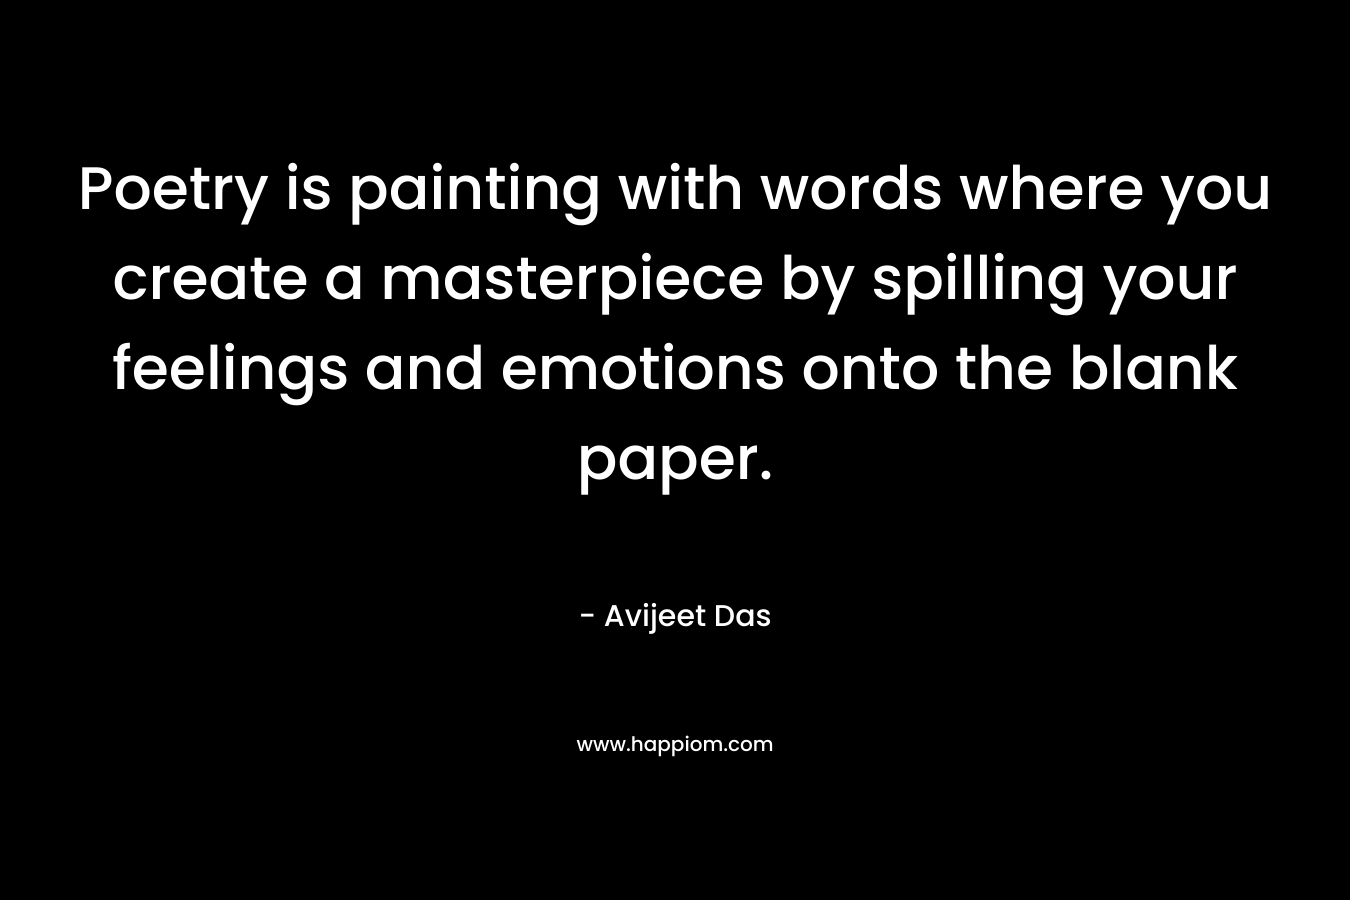 Poetry is painting with words where you create a masterpiece by spilling your feelings and emotions onto the blank paper.